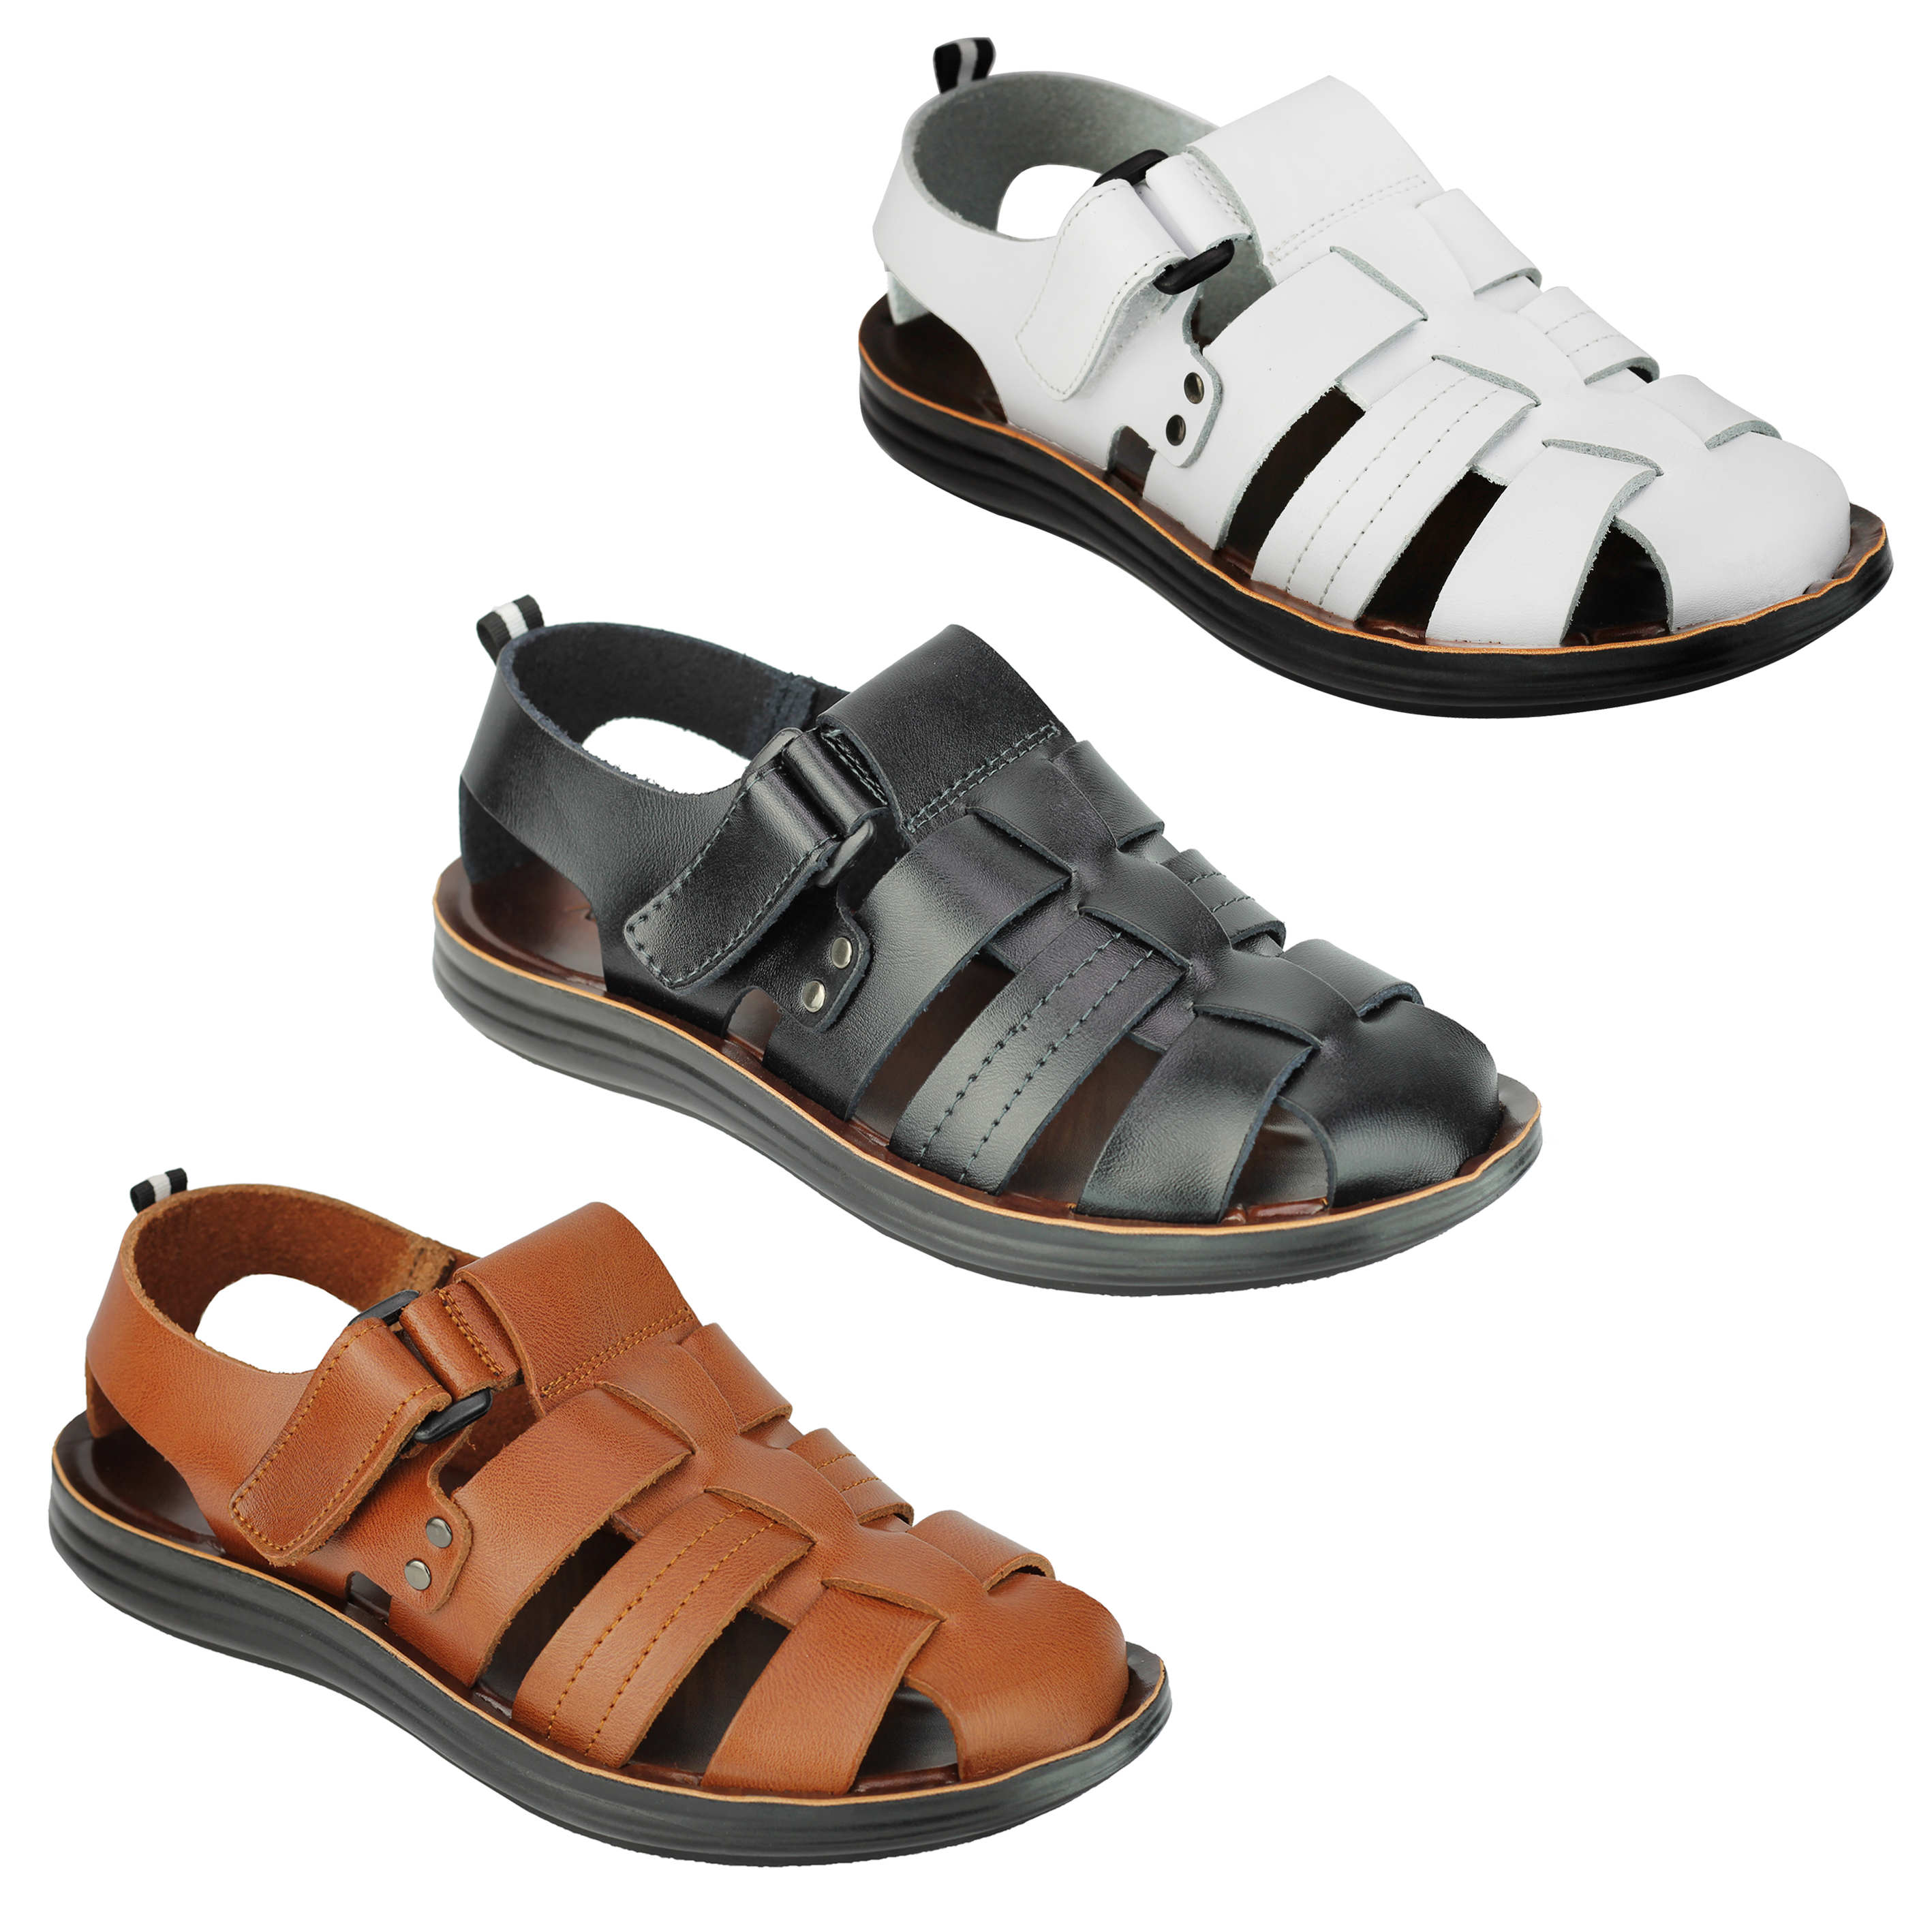 leather cross strap sandals